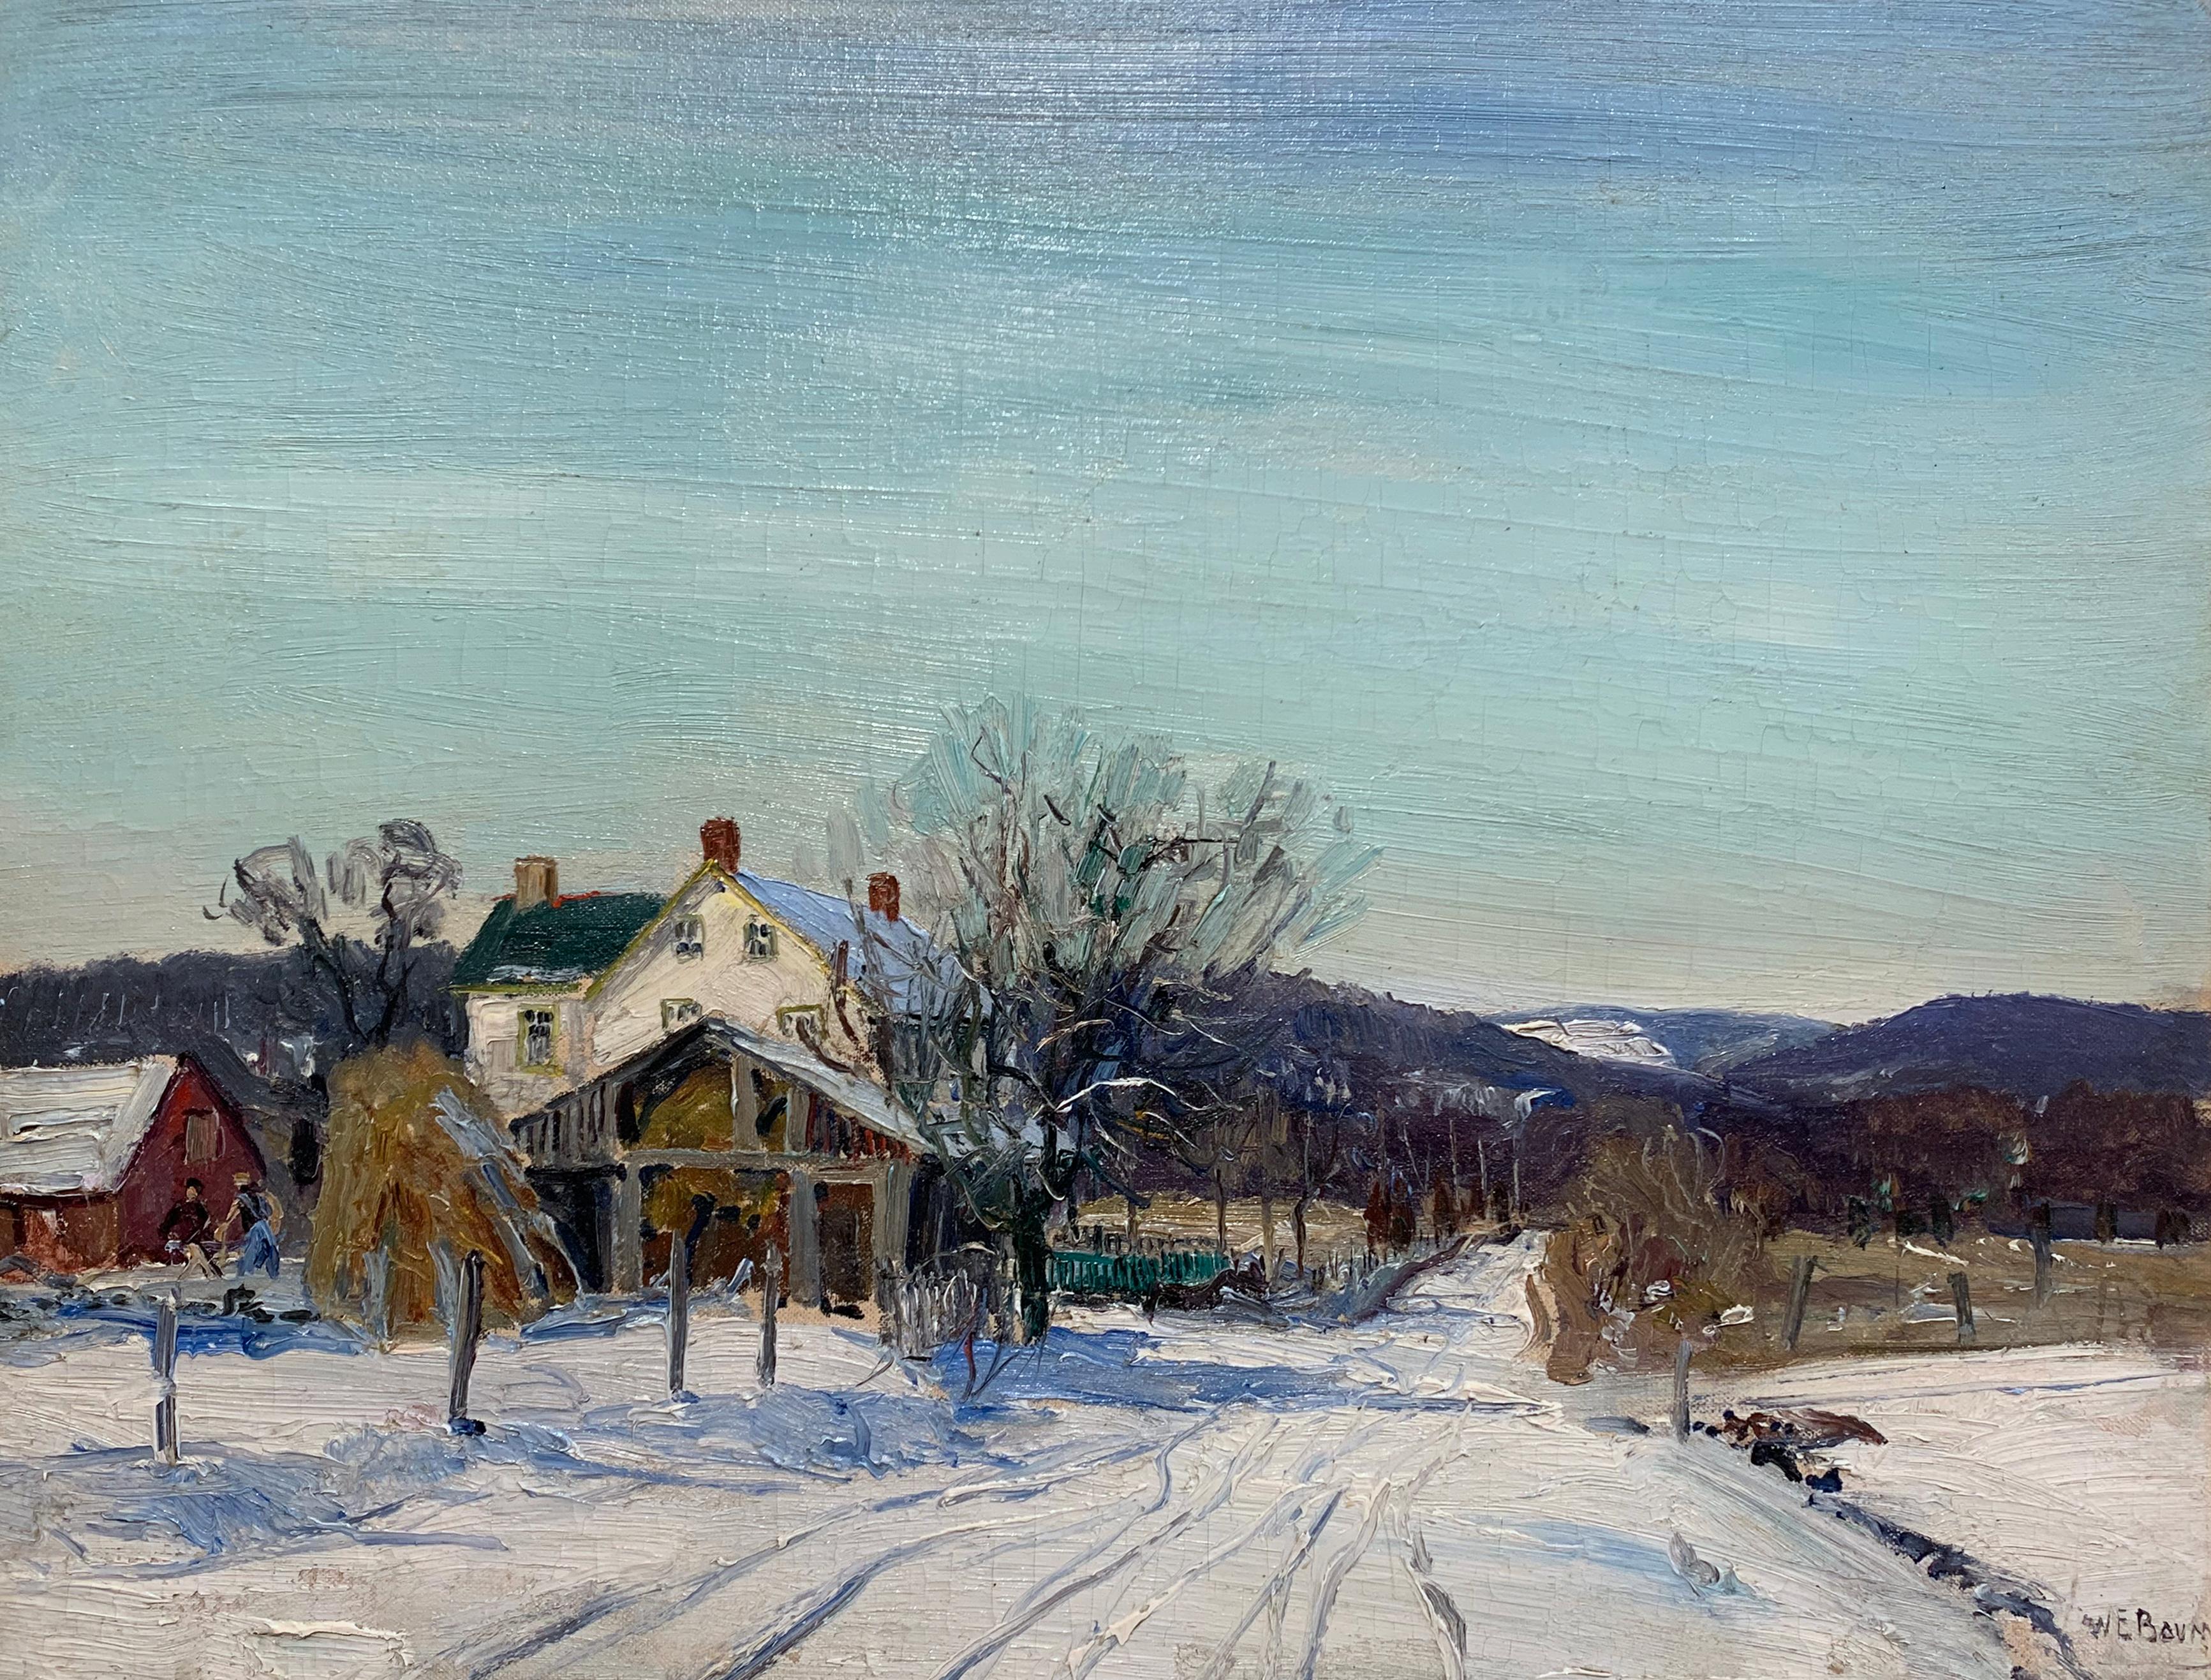 Mill Road, Pennsylvania Impressionist Winter Landscape, Snow Scene with Figures - Painting by Walter Emerson Baum